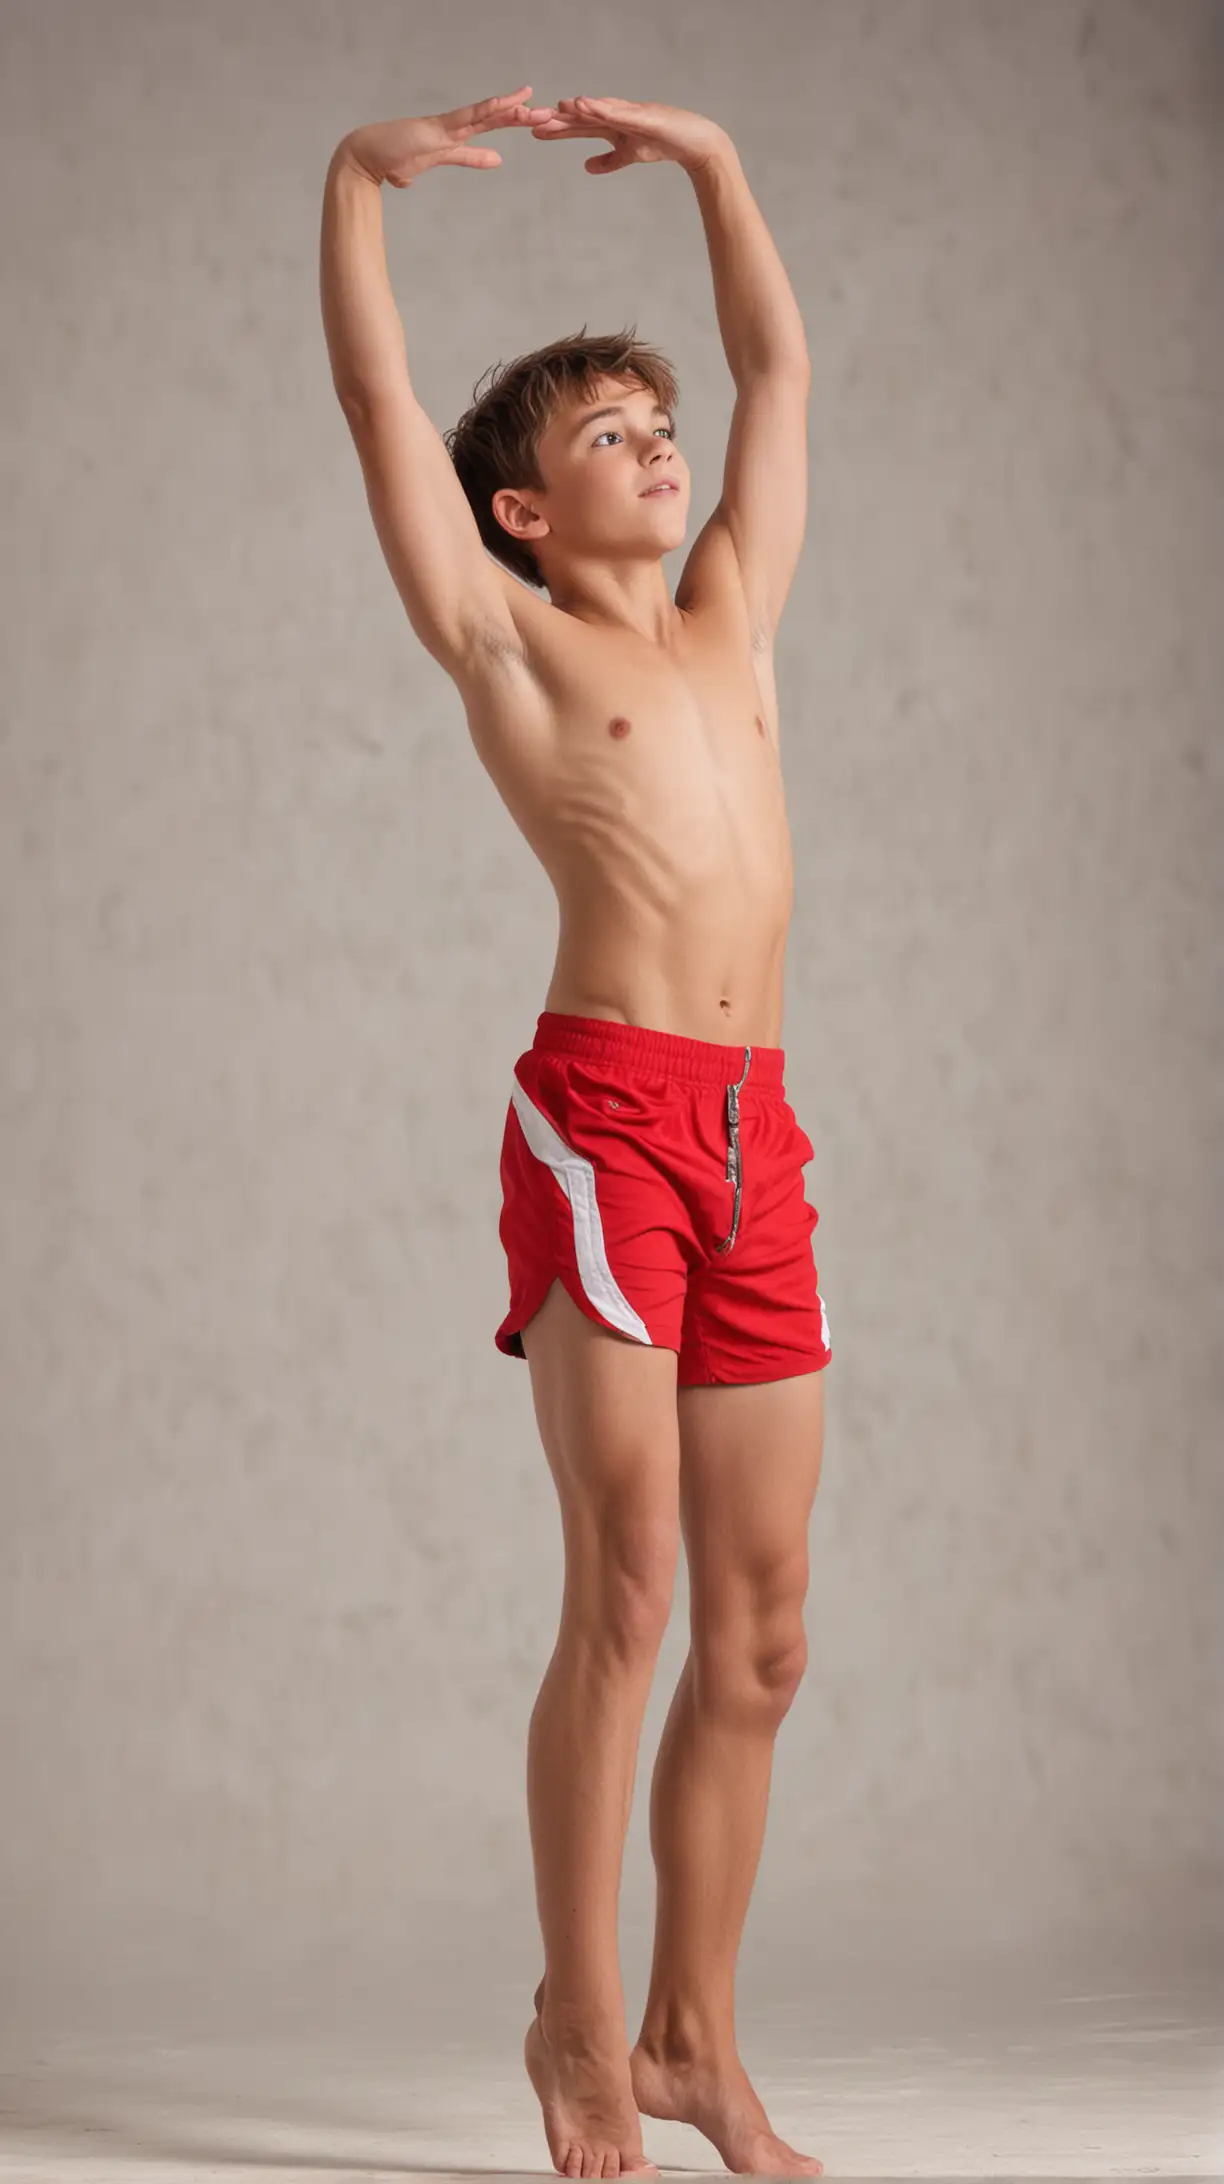 cute teen boy gymnast, doing star jumps, legs splayed wide apart, , arms above his head, red short shorts, barefoot